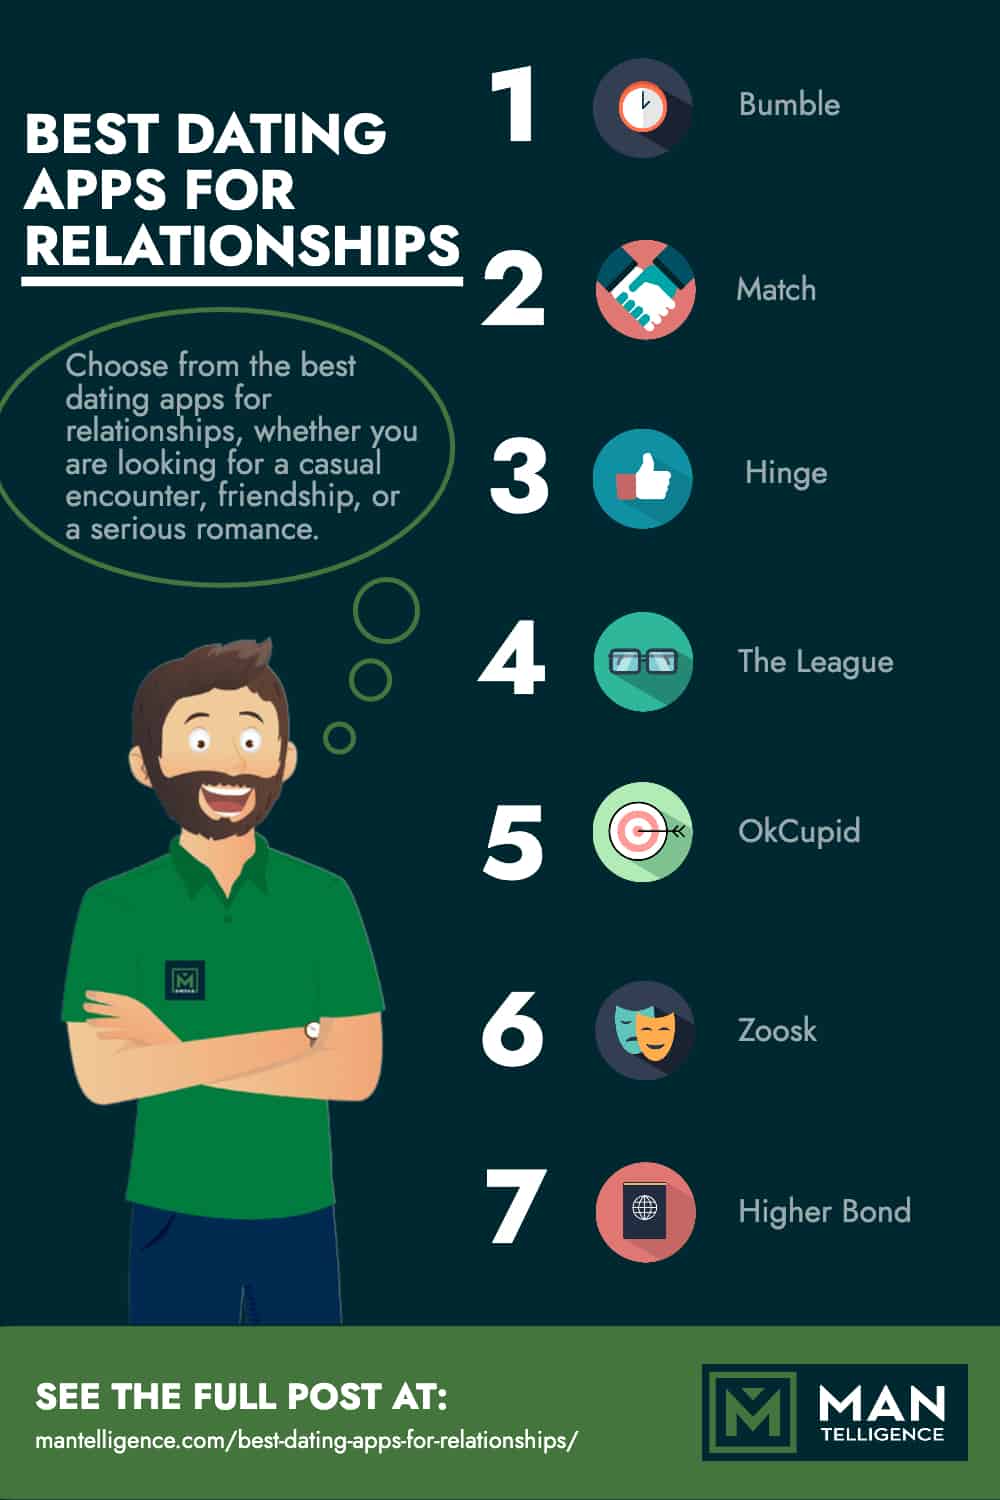 Best Dating Apps For Relationships - Infographic